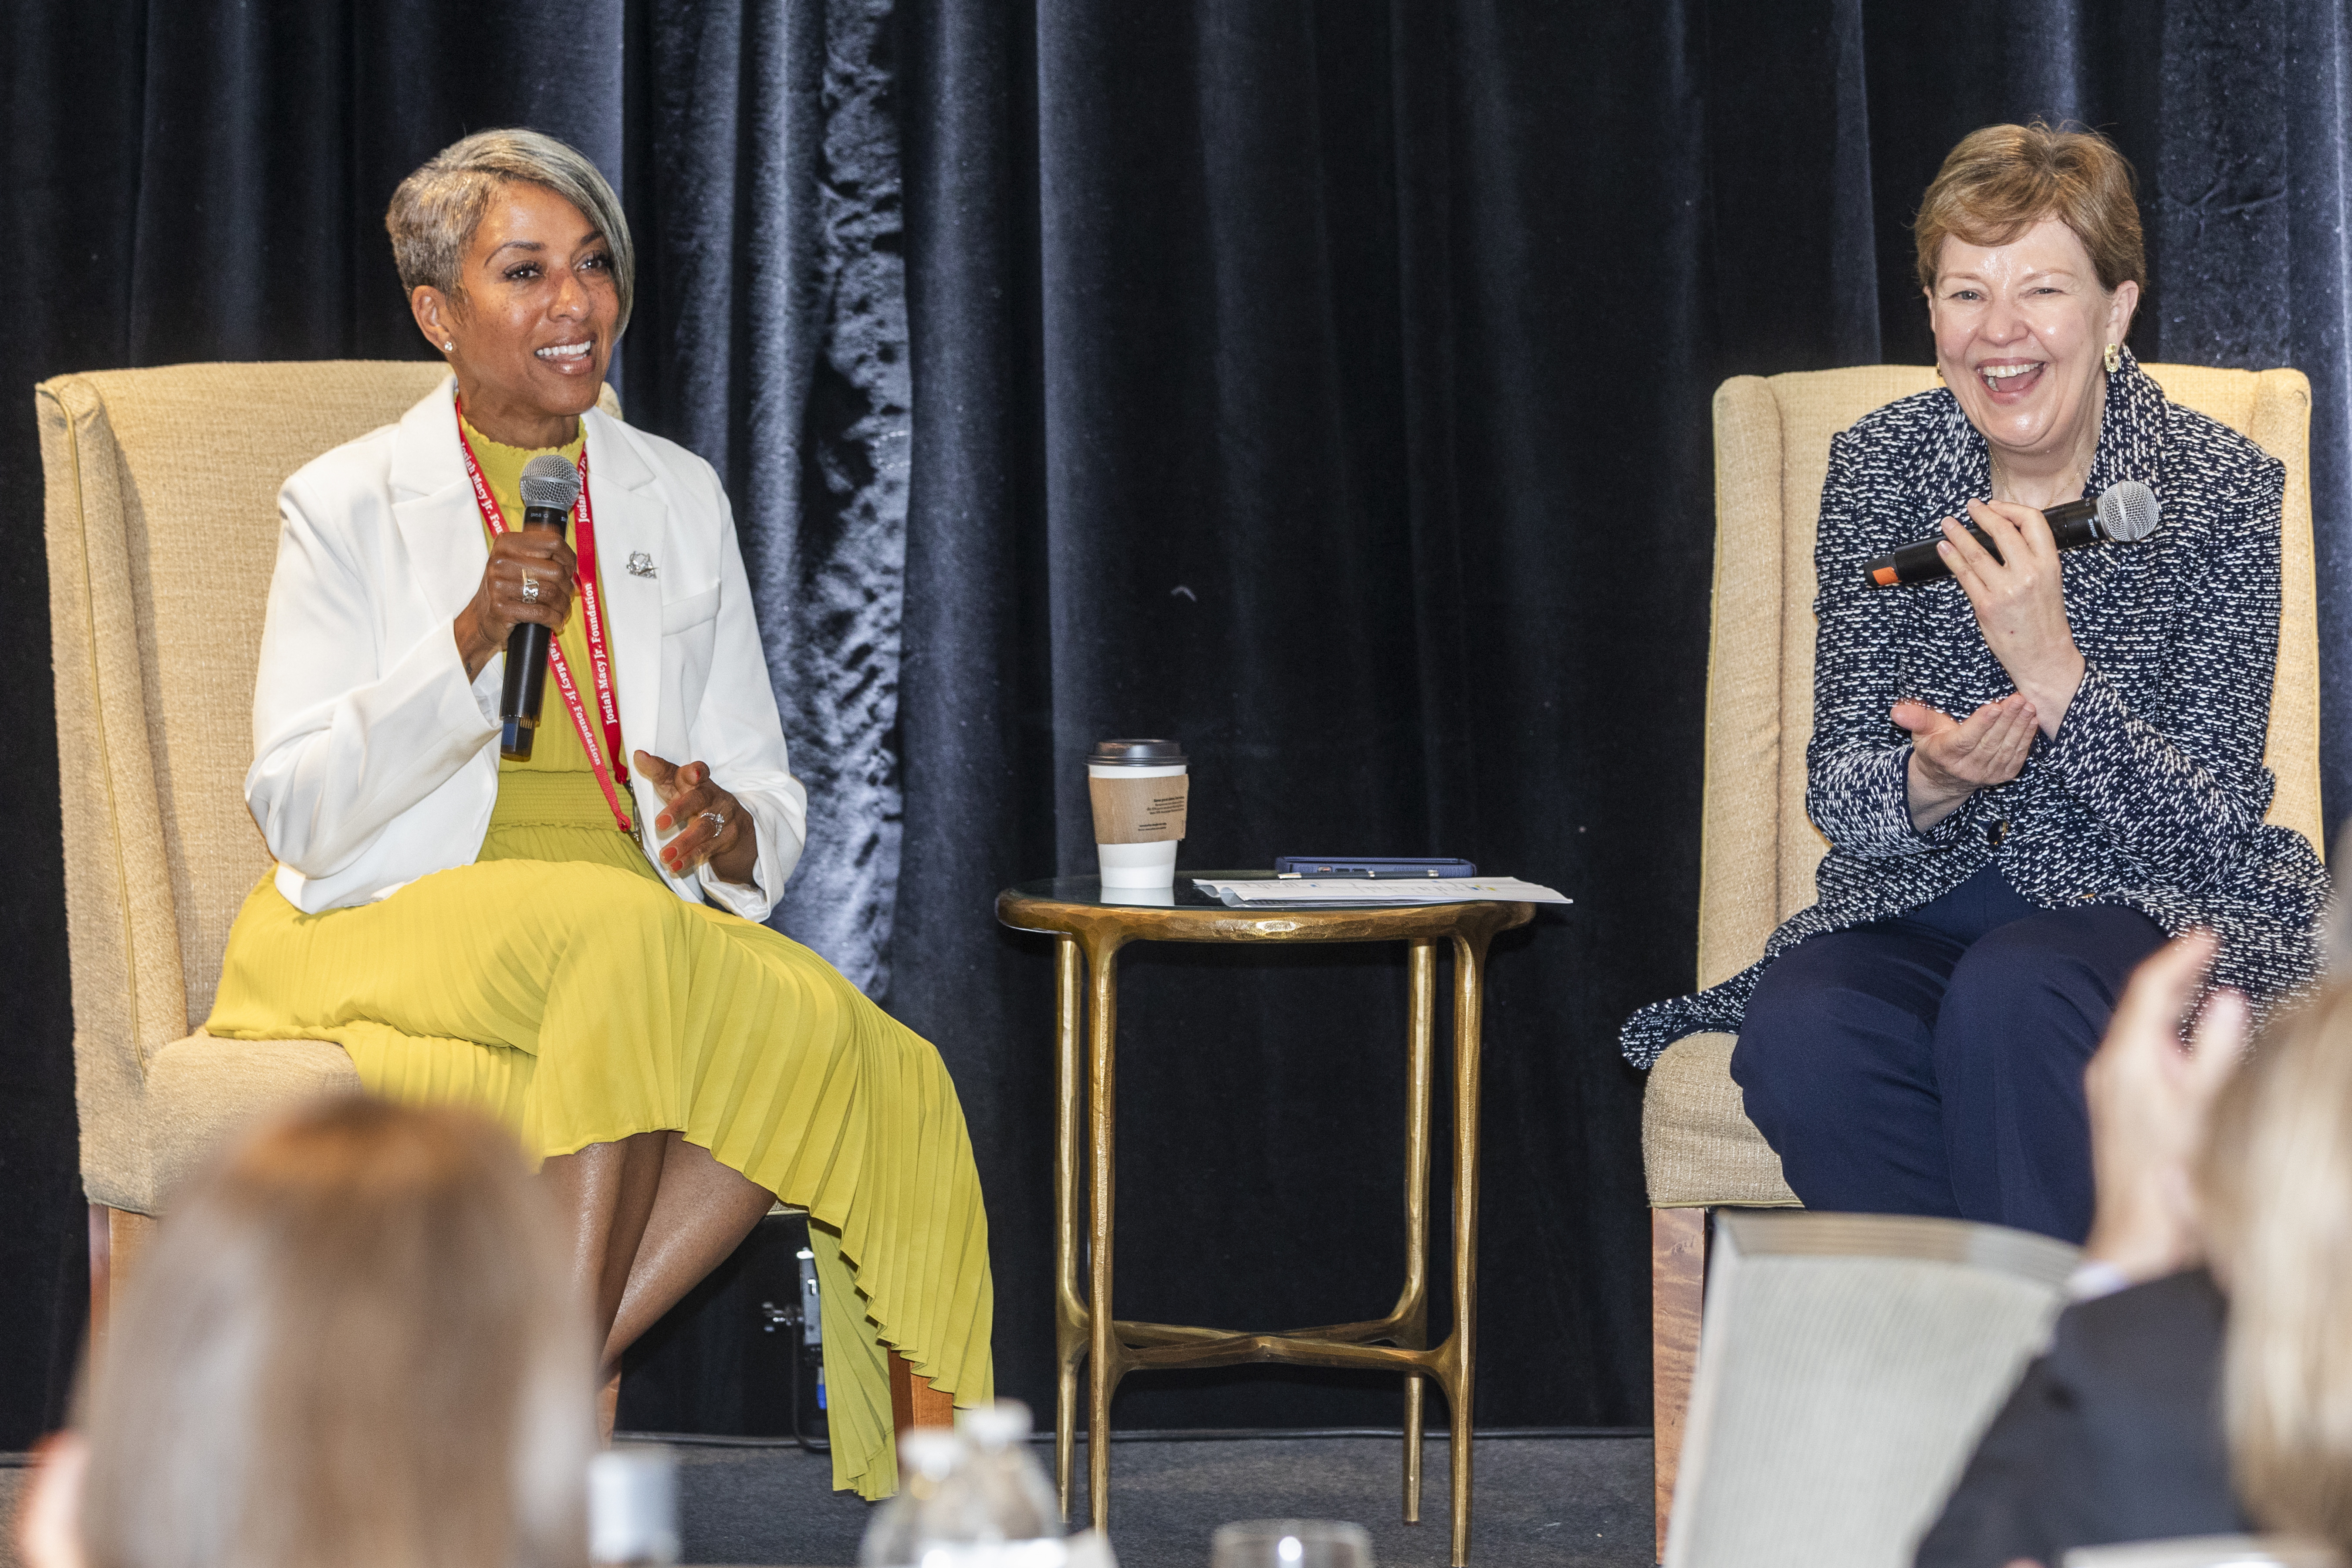 Dr. Kimberly Manning and Dr. Holly J. Humphrey are sitting opposite one another in chairs on a stage holding microphones with a table in between them.